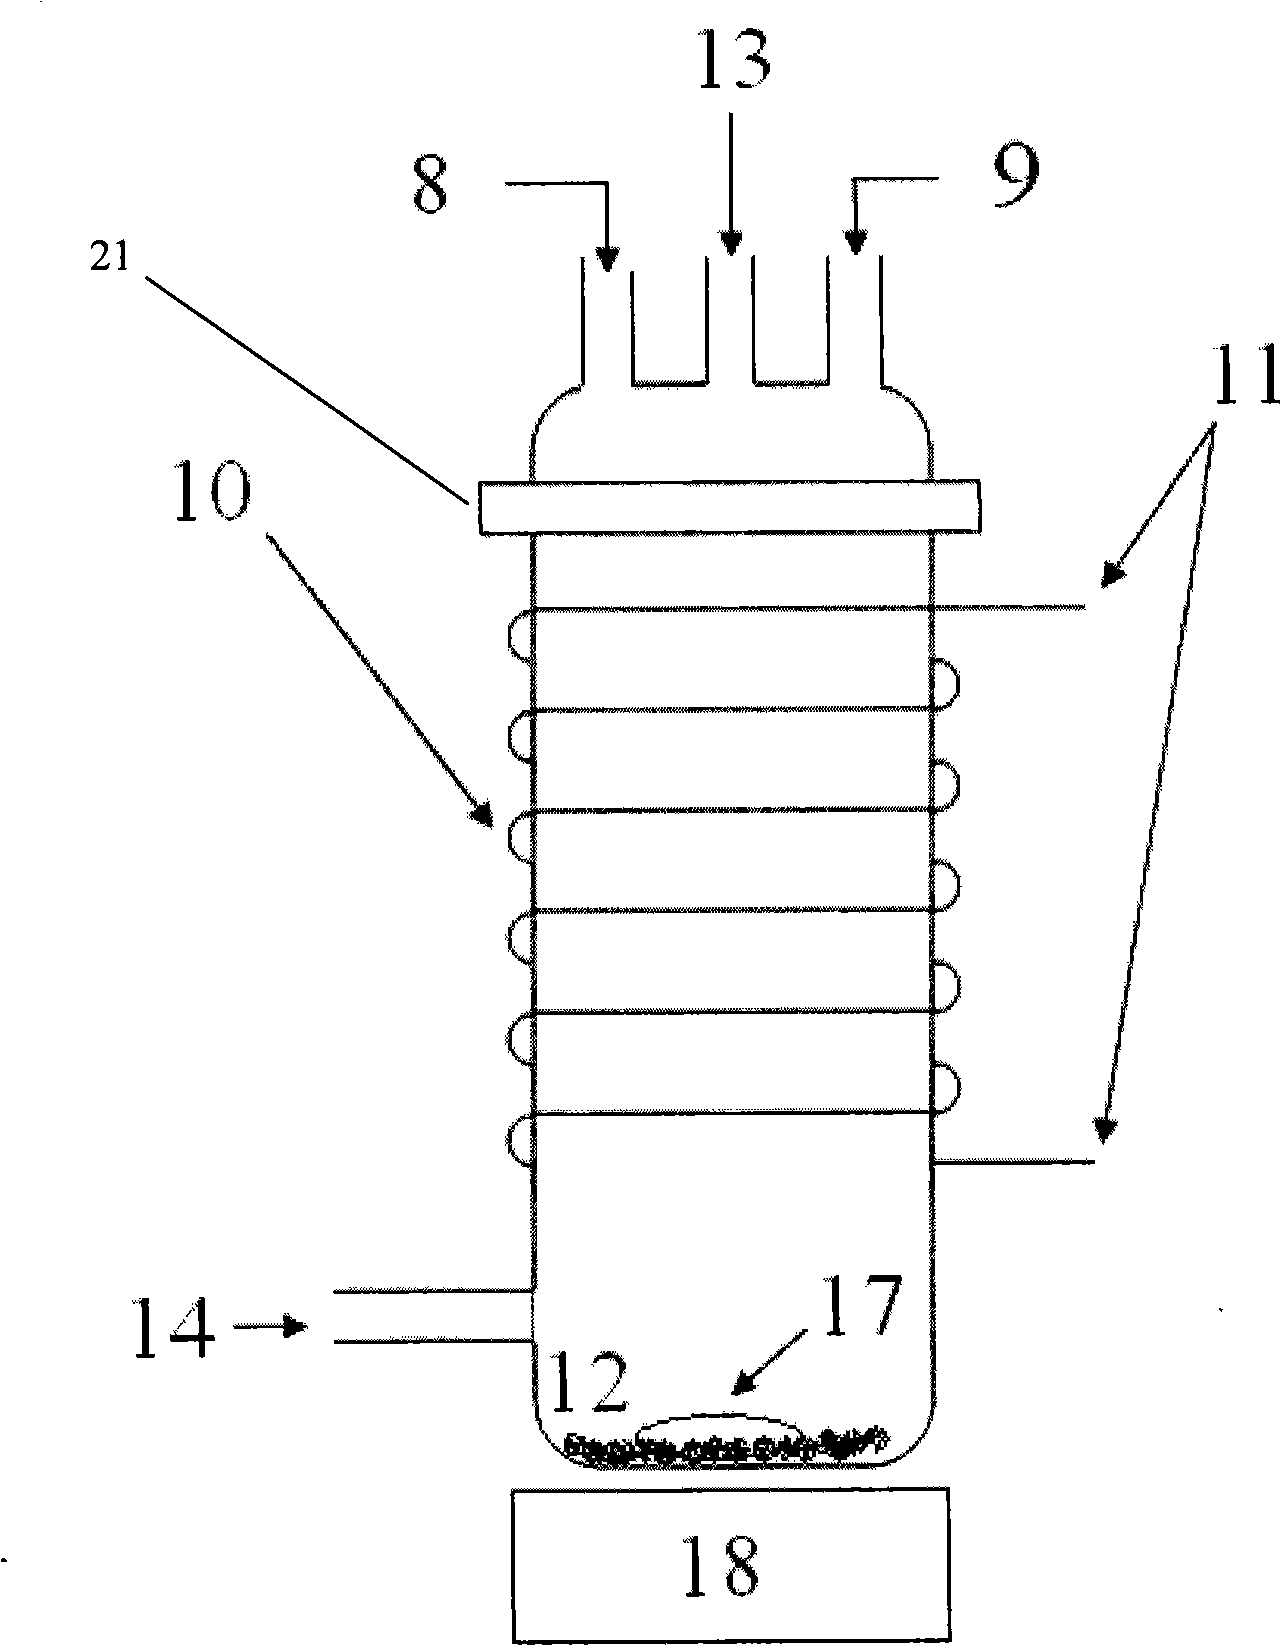 Plasma film coating apparatus for particle surface modification